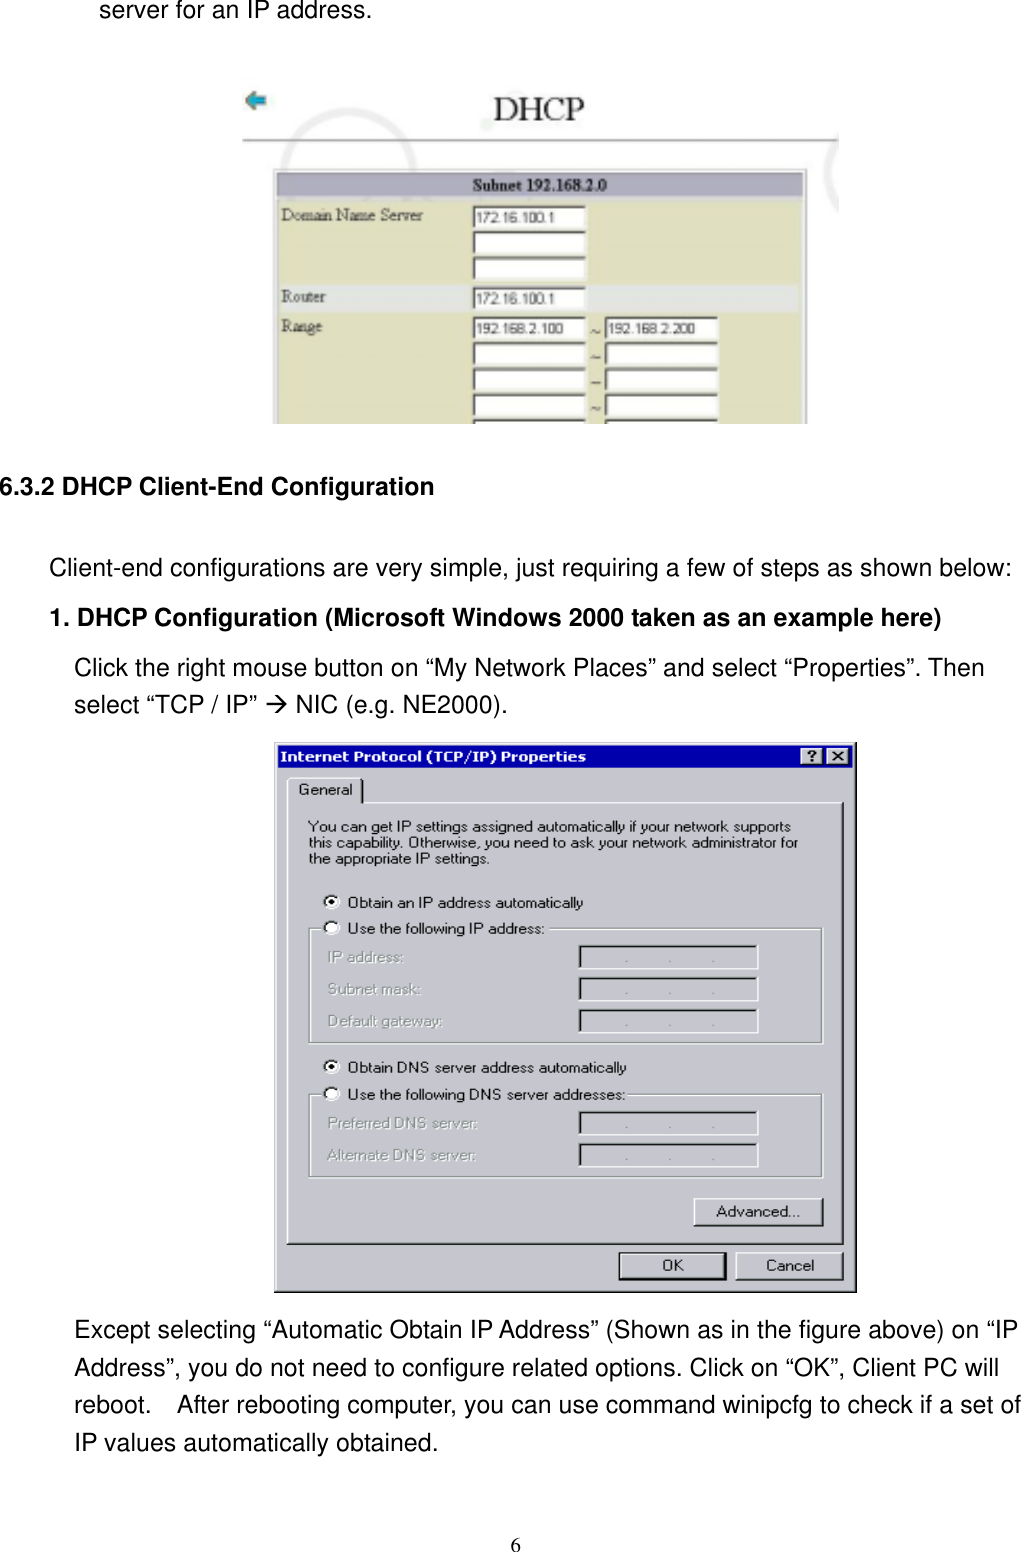  6server for an IP address.   6.3.2 DHCP Client-End Configuration Client-end configurations are very simple, just requiring a few of steps as shown below: 1. DHCP Configuration (Microsoft Windows 2000 taken as an example here) Click the right mouse button on “My Network Places” and select “Properties”. Then select “TCP / IP” Æ NIC (e.g. NE2000).  Except selecting “Automatic Obtain IP Address” (Shown as in the figure above) on “IP Address”, you do not need to configure related options. Click on “OK”, Client PC will reboot.    After rebooting computer, you can use command winipcfg to check if a set of IP values automatically obtained.   